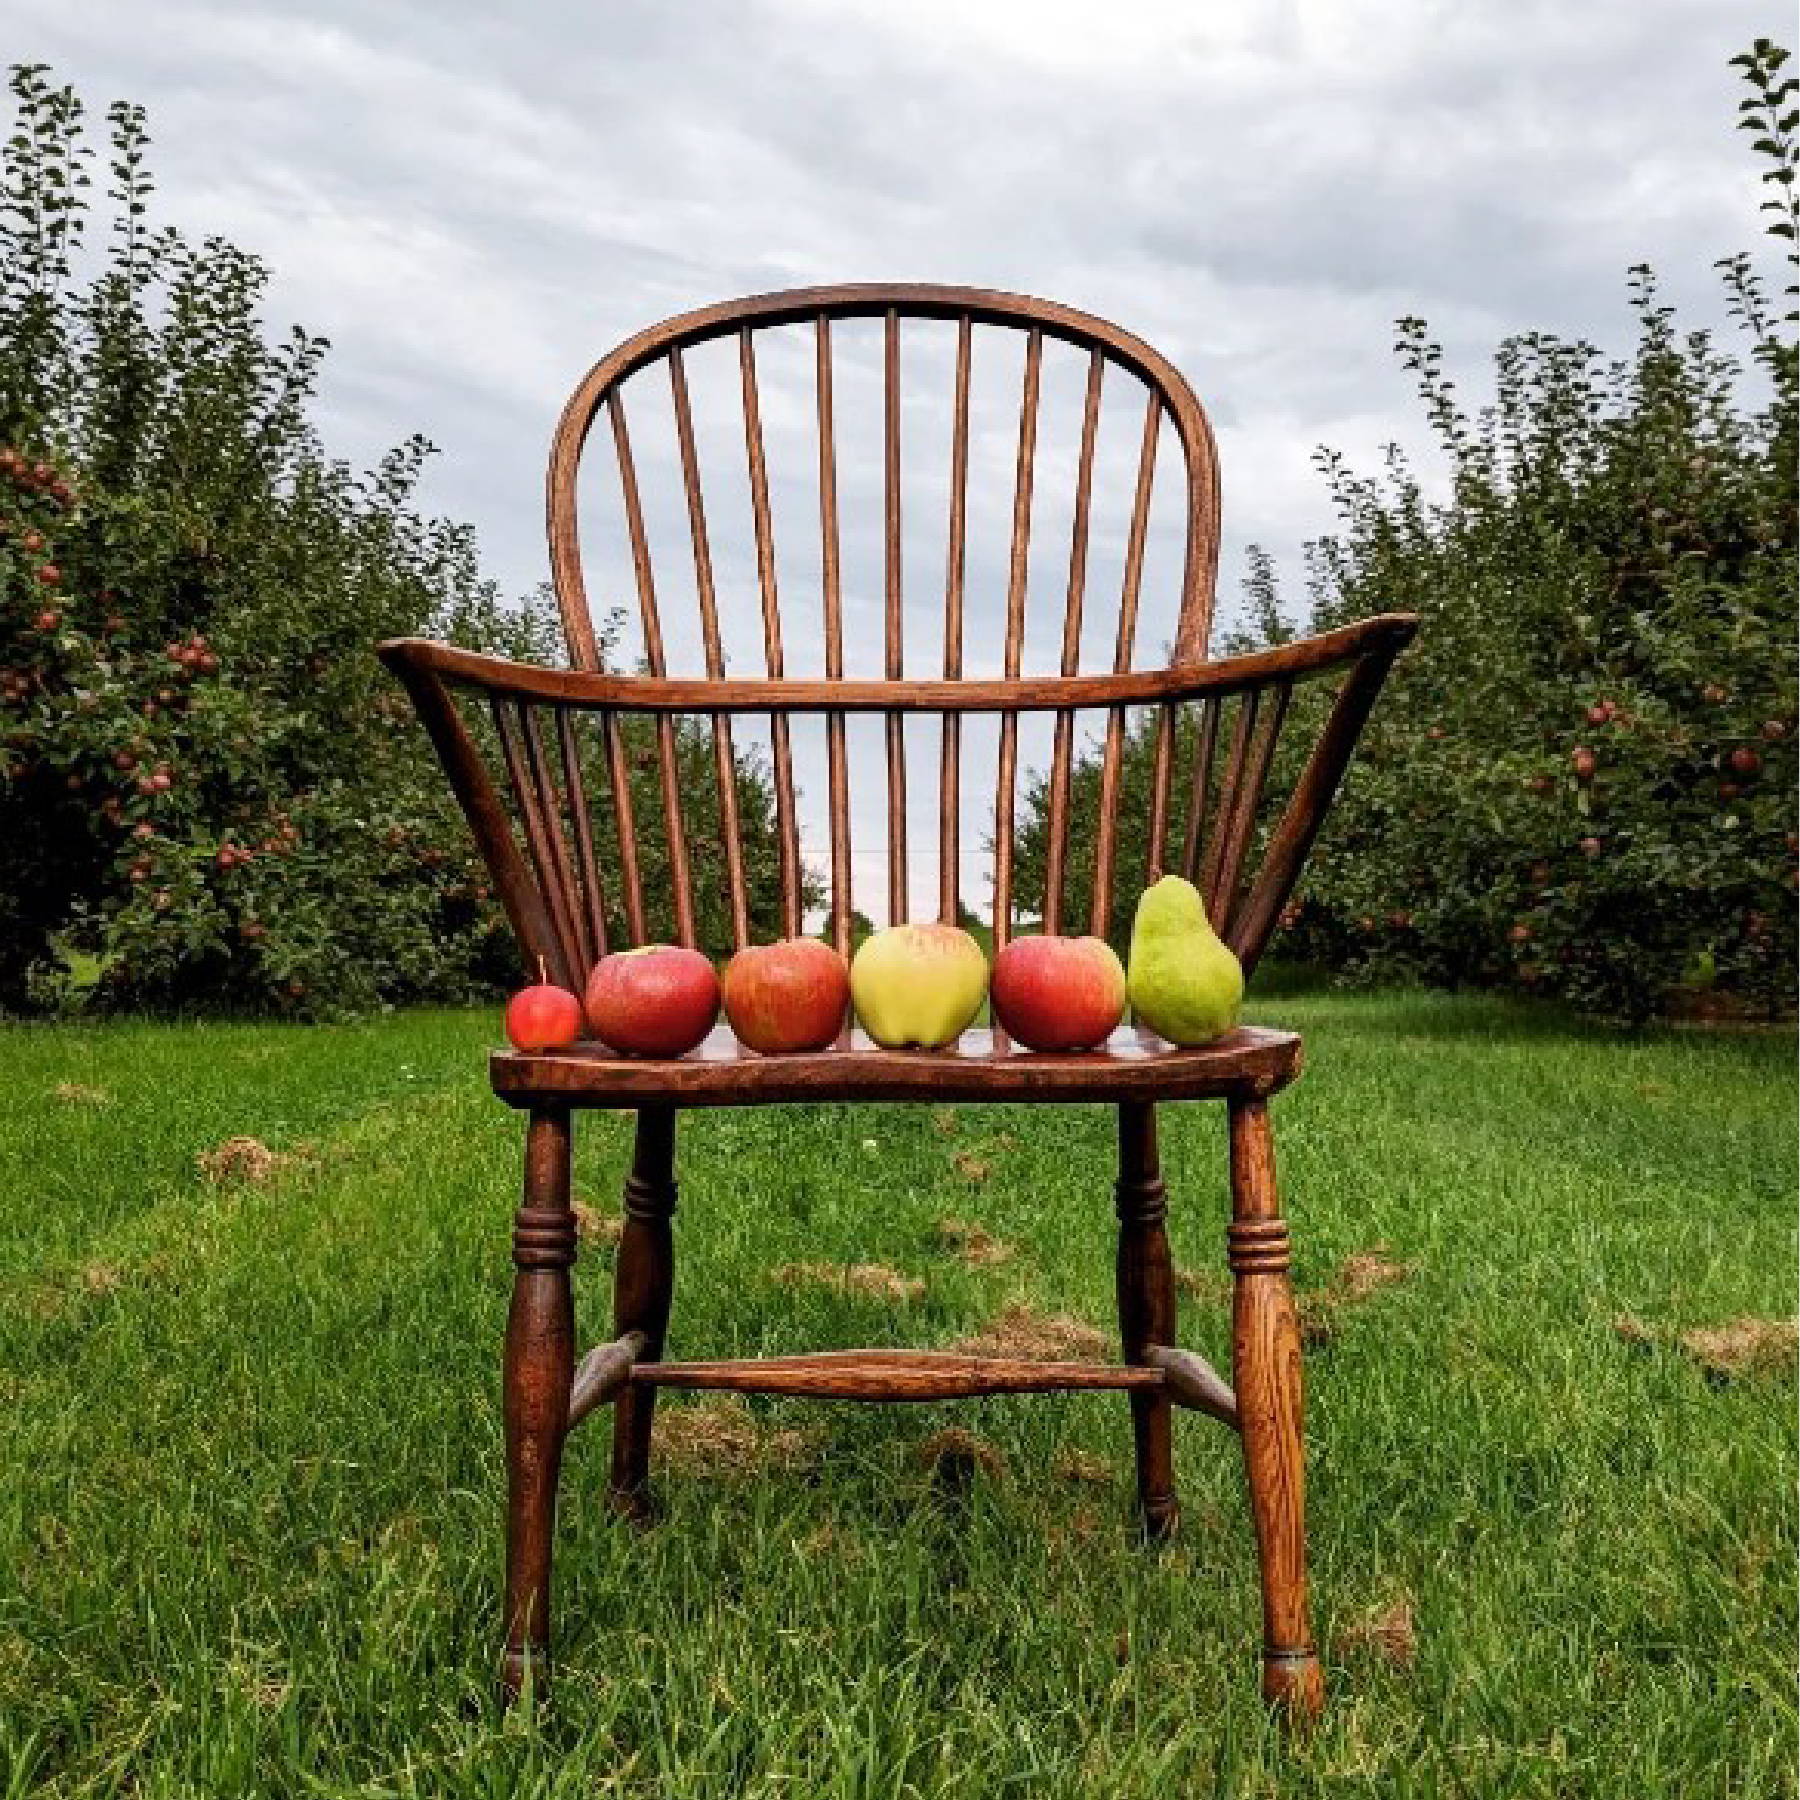 a chair with apples on it